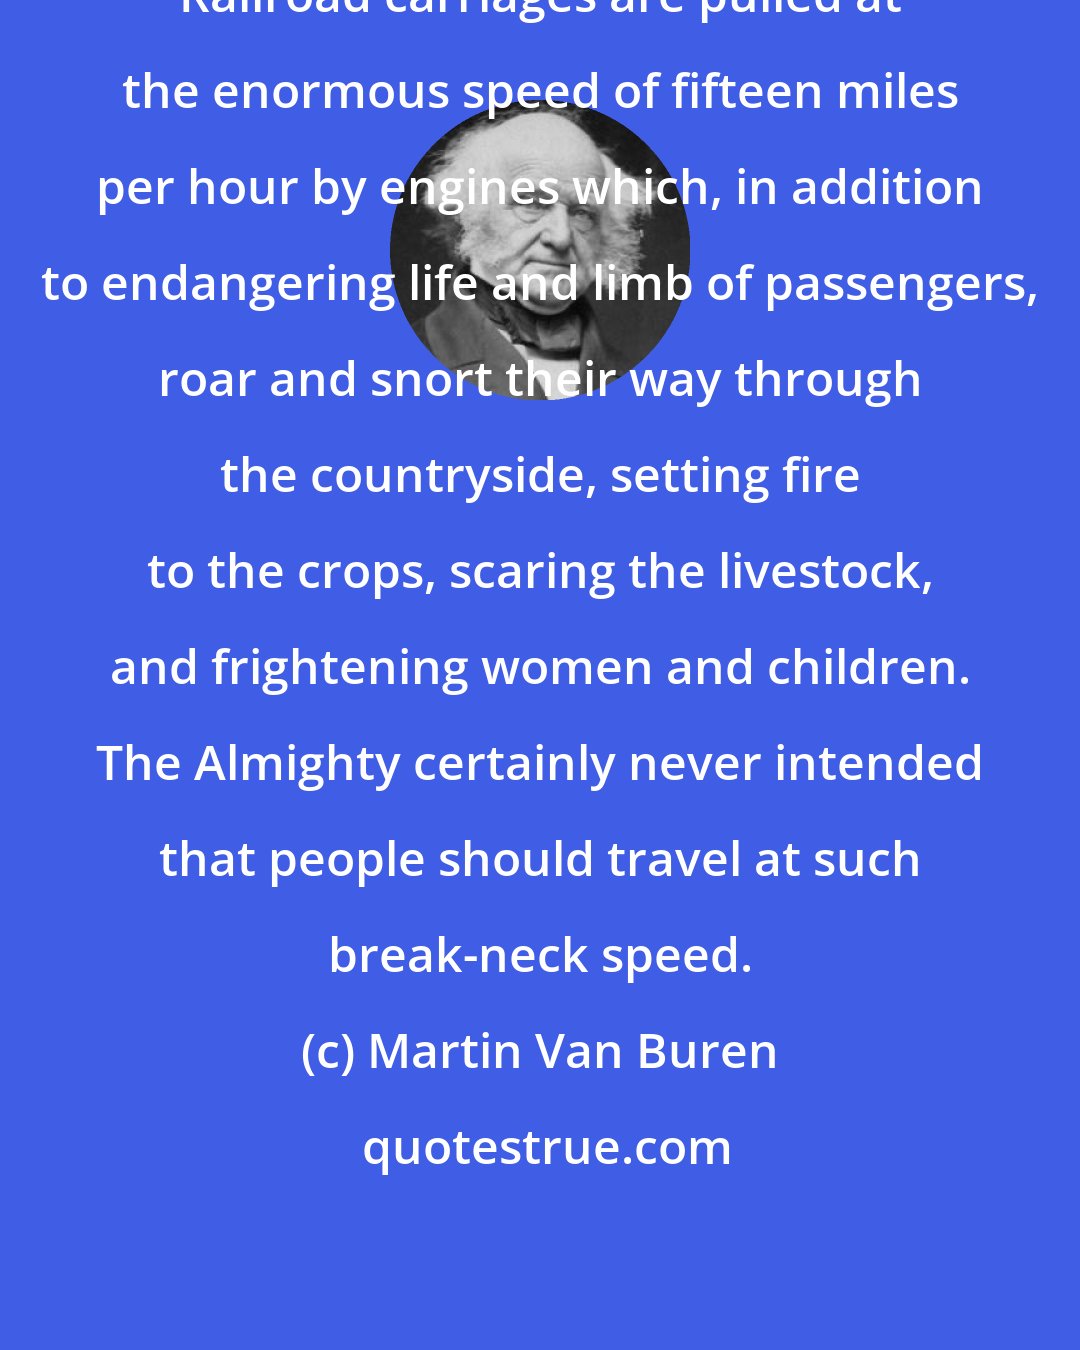 Martin Van Buren: Railroad carriages are pulled at the enormous speed of fifteen miles per hour by engines which, in addition to endangering life and limb of passengers, roar and snort their way through the countryside, setting fire to the crops, scaring the livestock, and frightening women and children. The Almighty certainly never intended that people should travel at such break-neck speed.